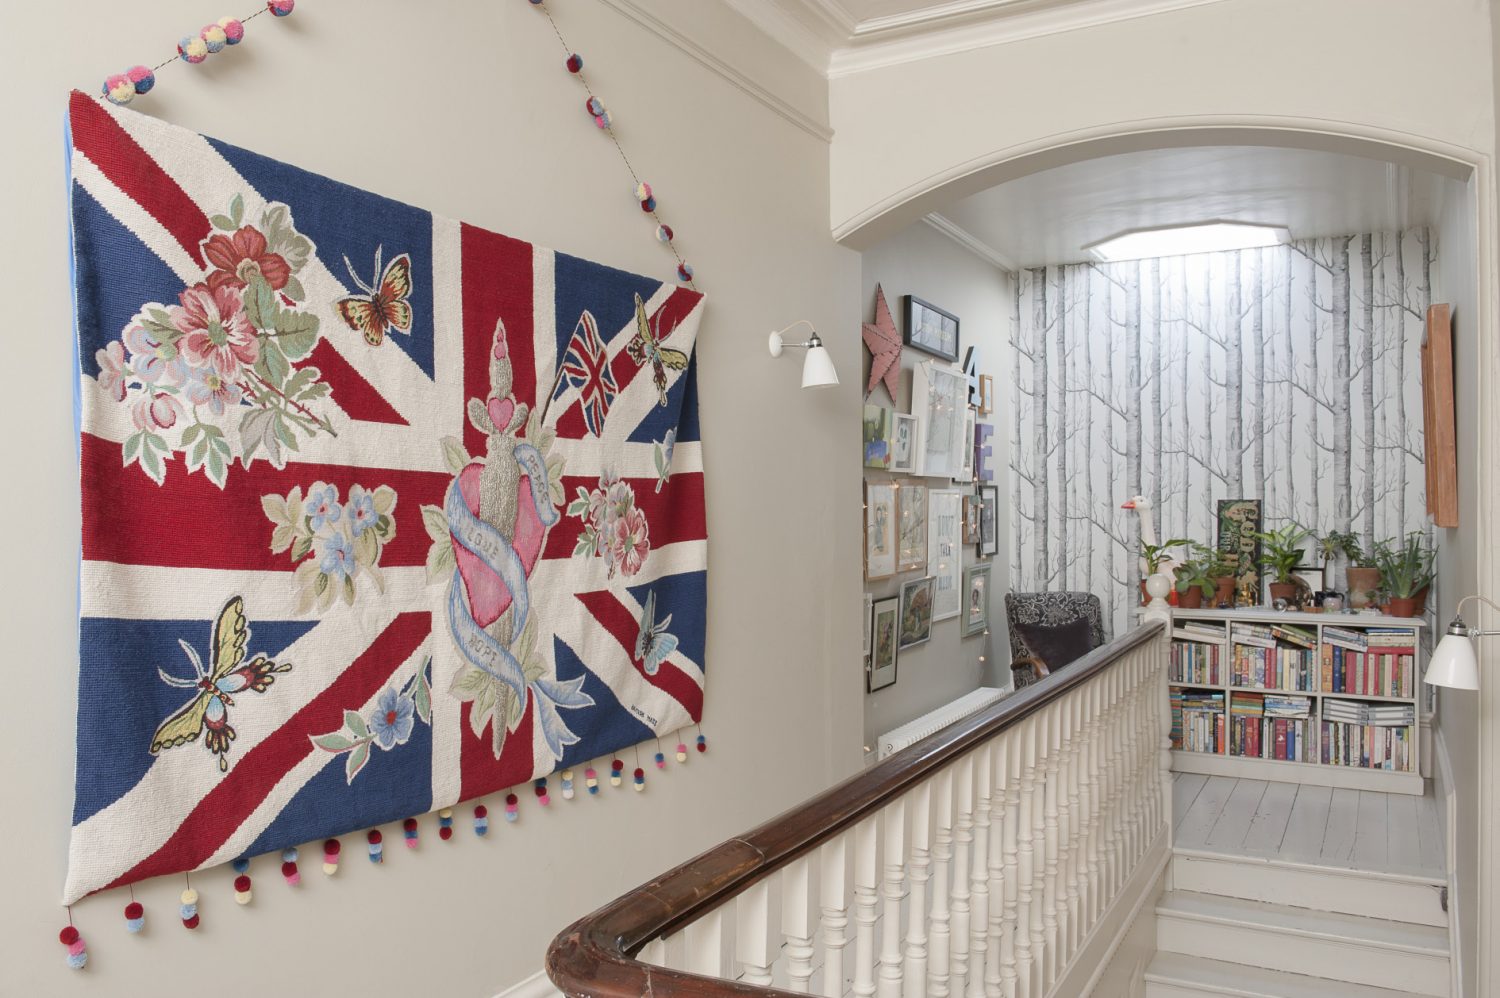 One end of the landing is papered in ‘Woods’ by Cole & Son and looks rather like a forest of bare birch trees. A giant embroidered and beaded Union Jack tapestry hangs boldly on one wall, whilst a comfy armchair is placed next to a set of full-to-bursting bookshelves